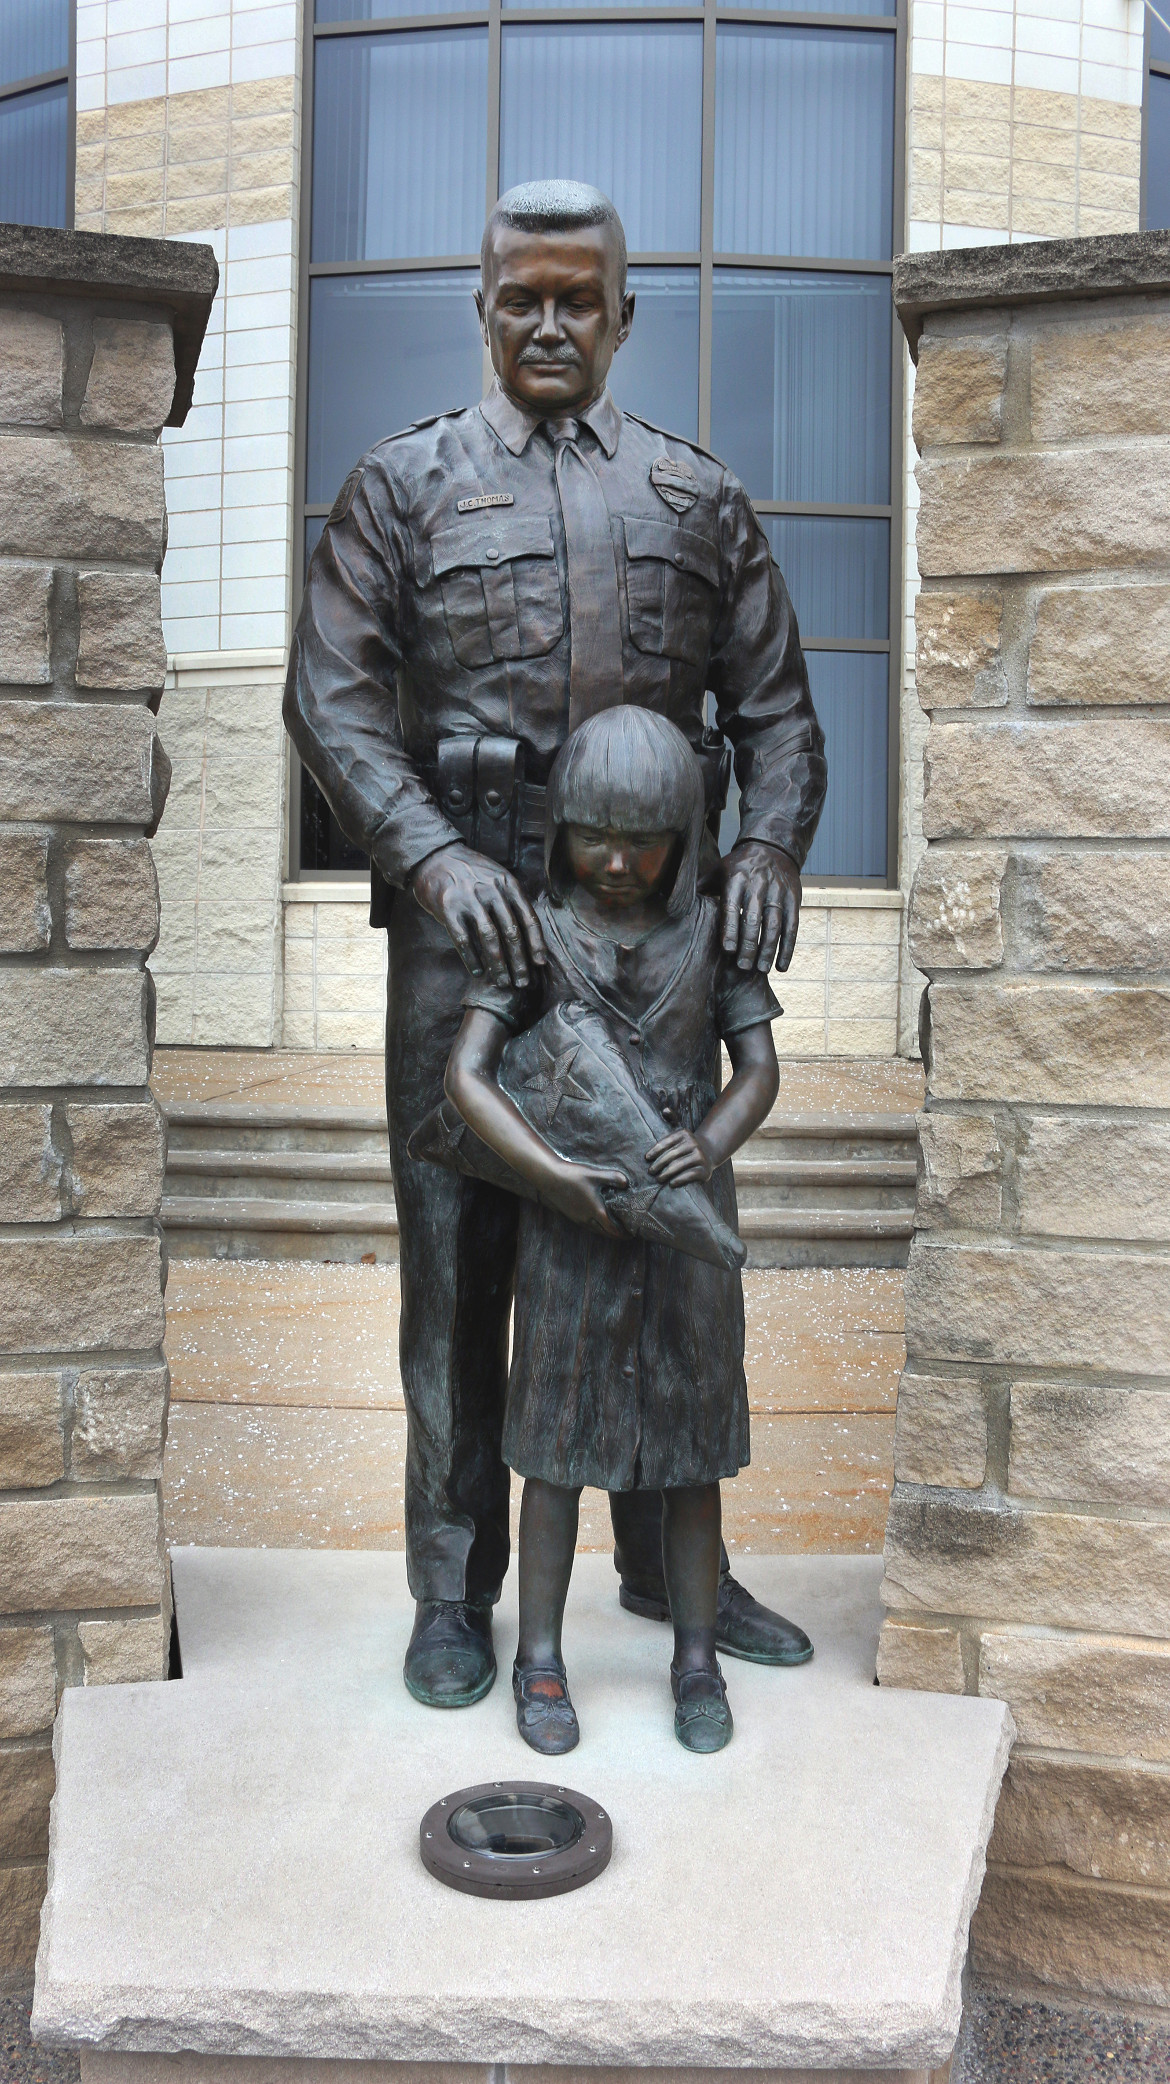 The statue at the Quad Cities Law Enforcement Officers Memorial. Photo by Bruce Walters.